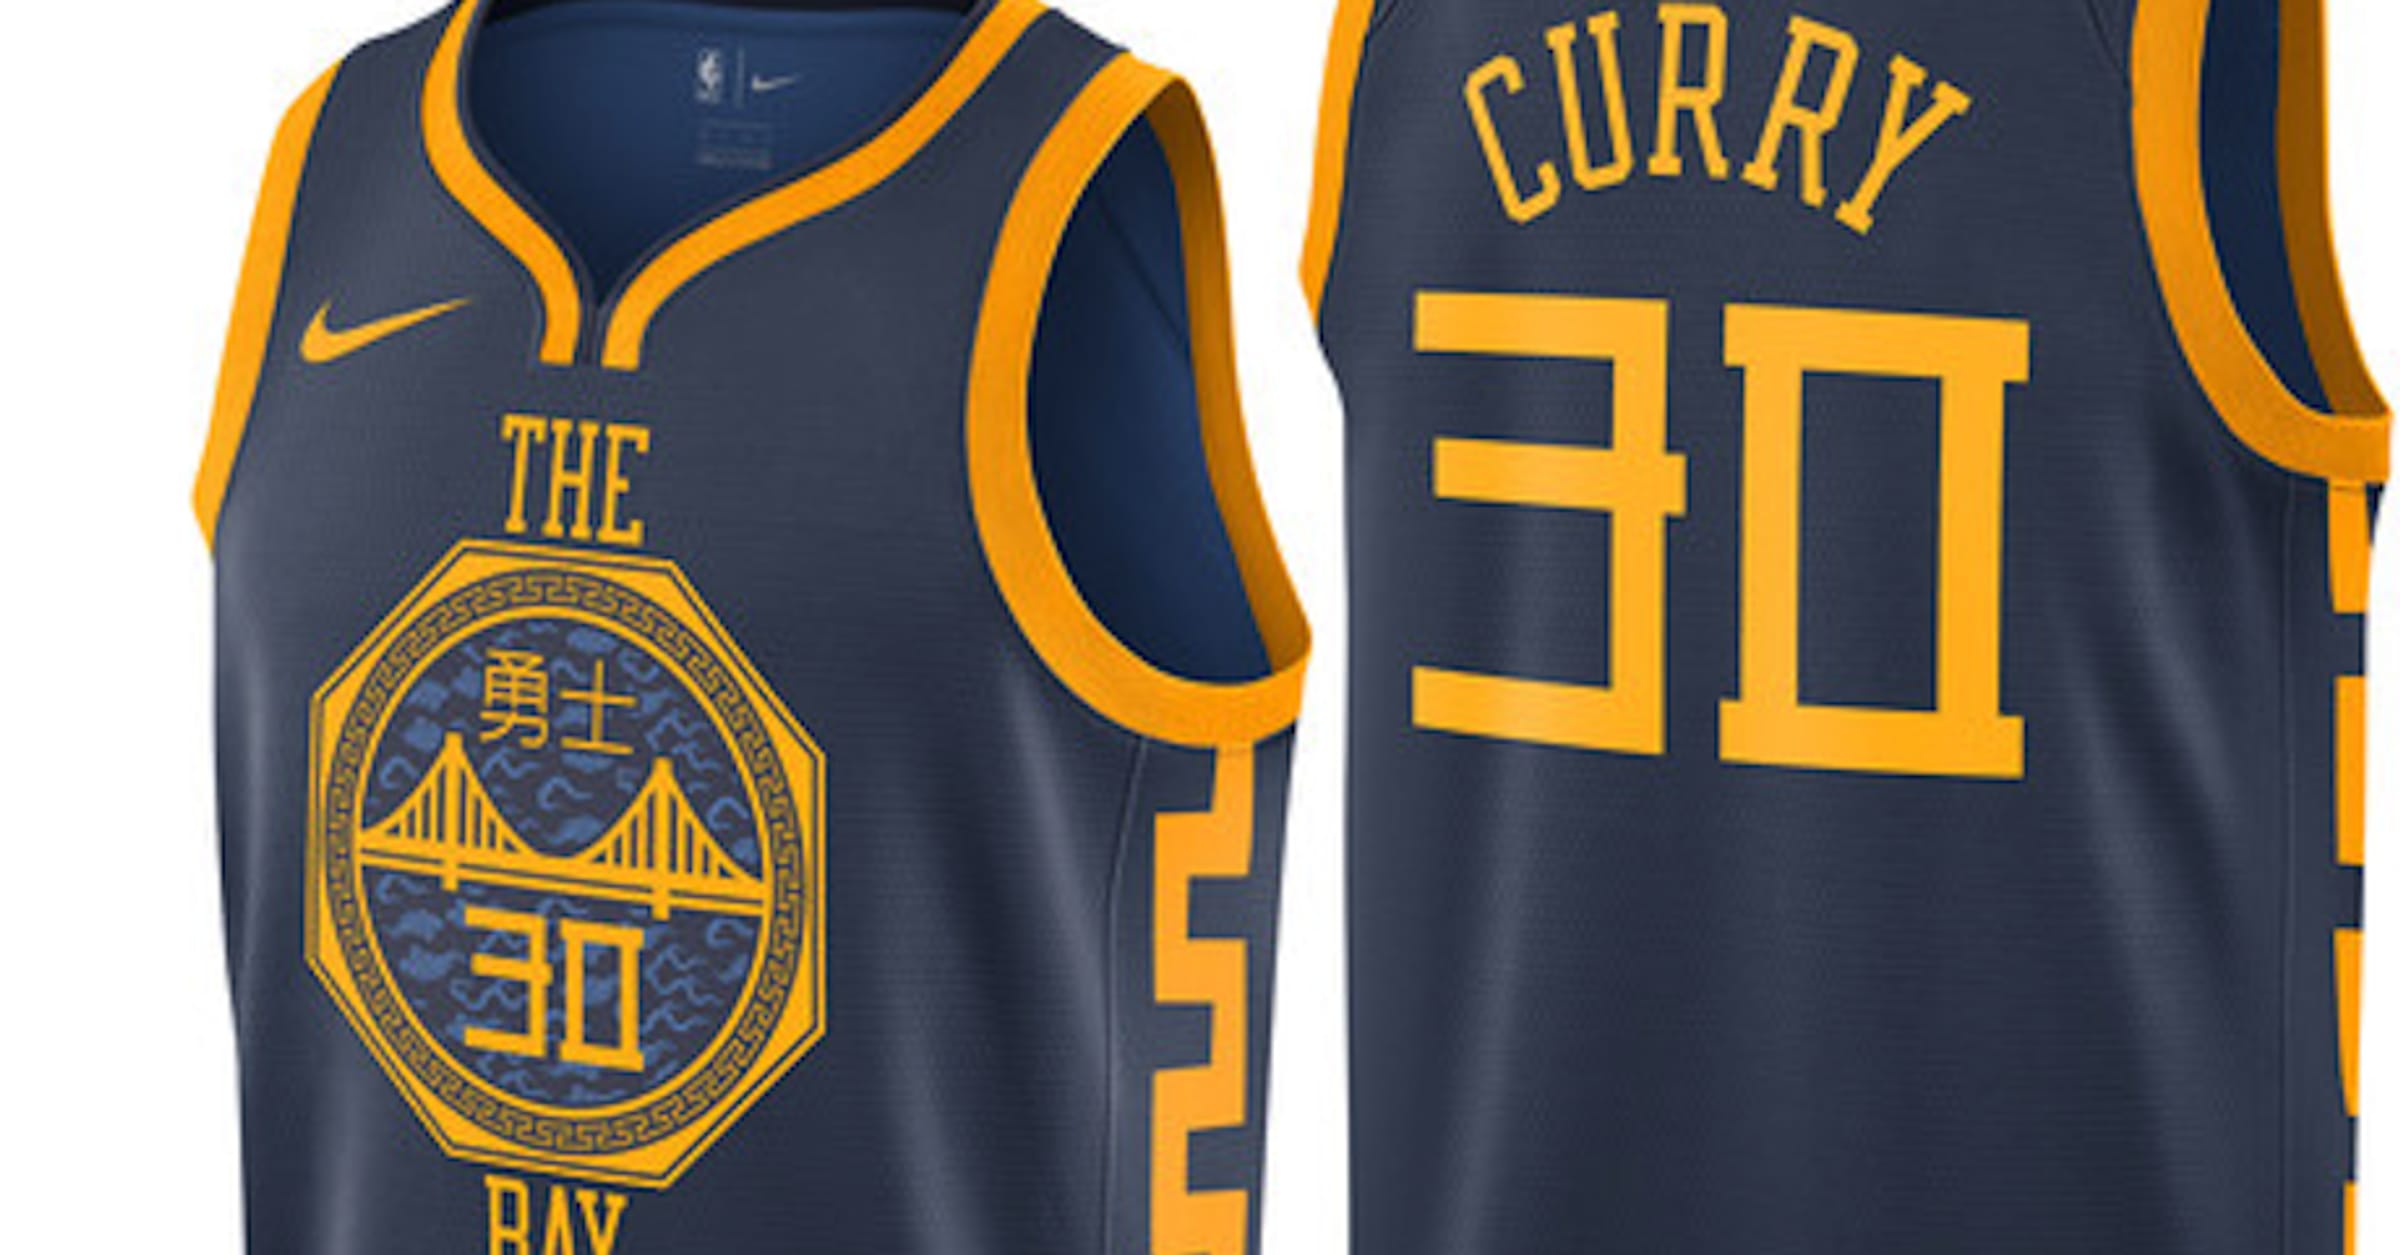 NBA City Edition jerseys ranked from dorkiest to coolest - Los